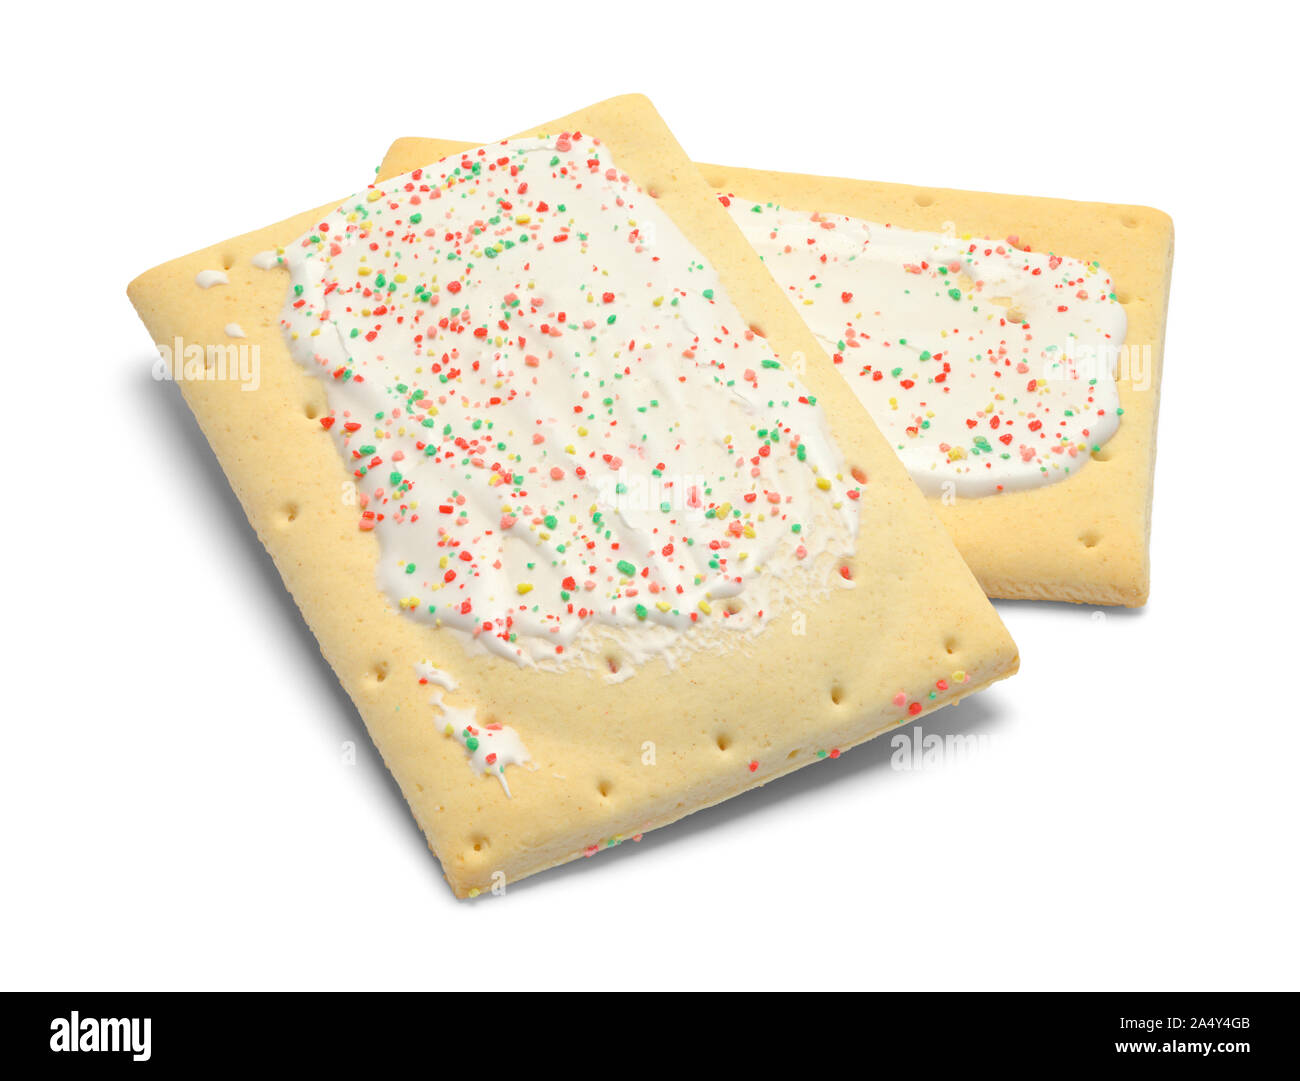 Two Toaster Pastries With Sprinkles Isolated on White. Stock Photo